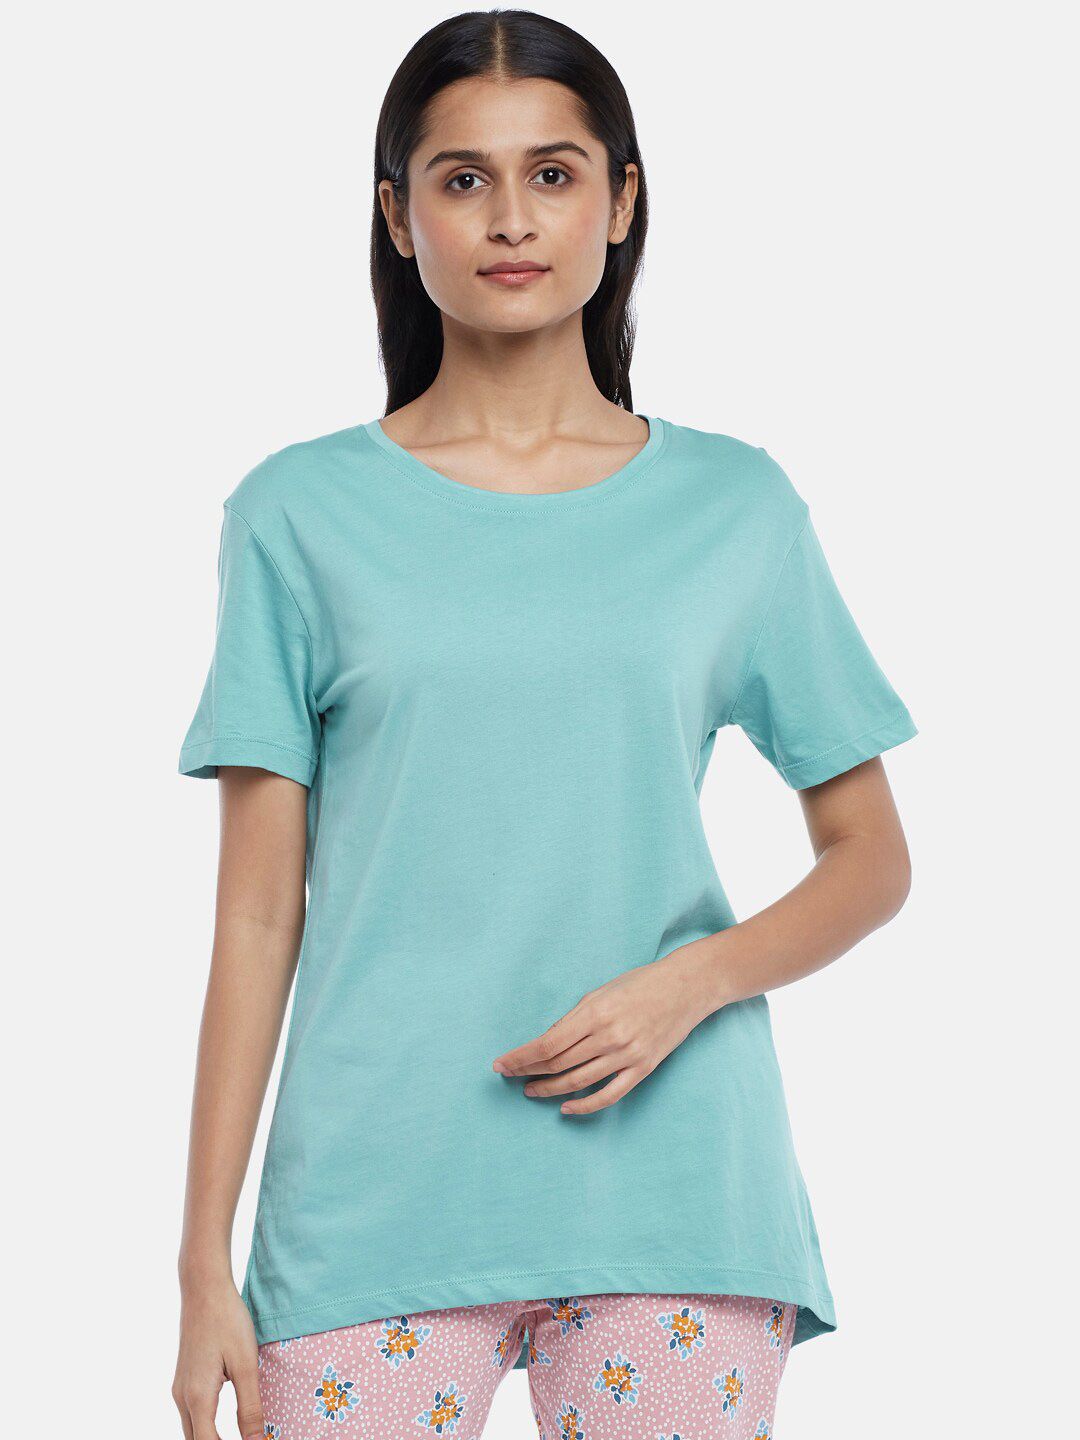 Dreamz by Pantaloons Women Turquoise Blue Solid Lounge tshirt Price in India